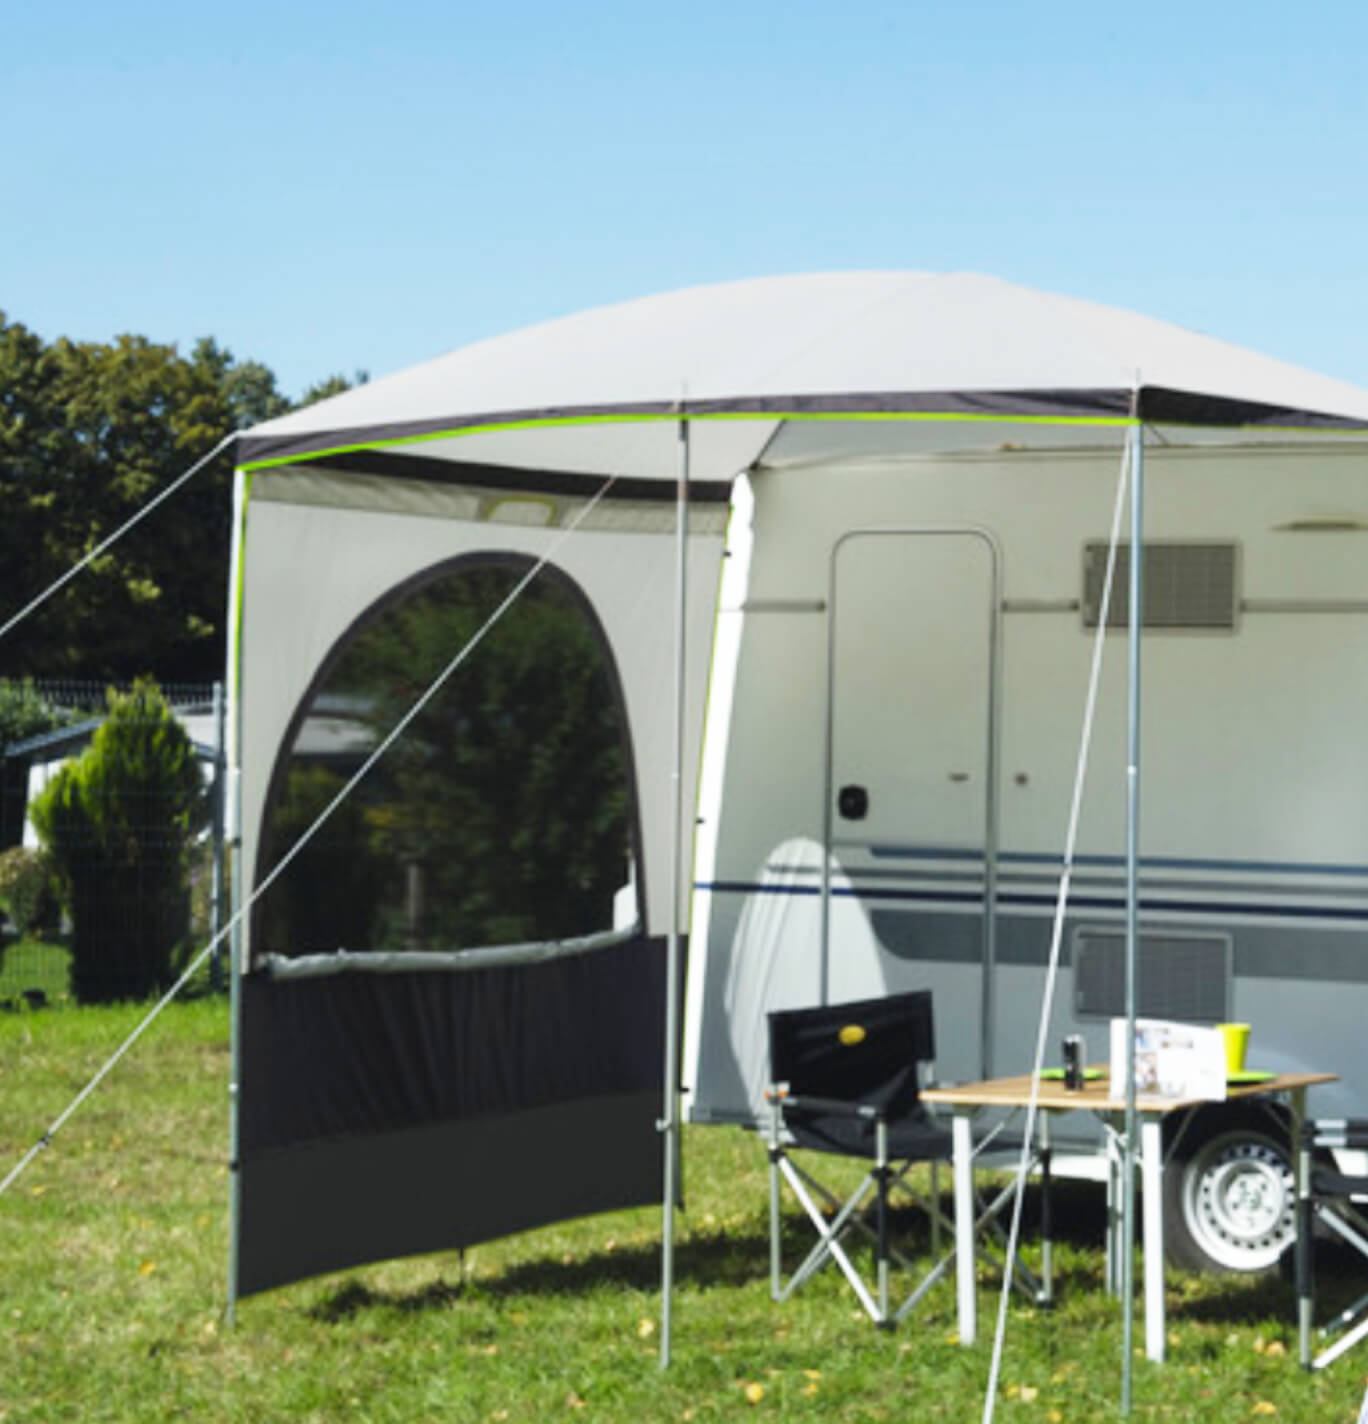 Reimo Palm Beach 2 LWB Side Wall For LWB Sun Canopy | Campers & Caravans